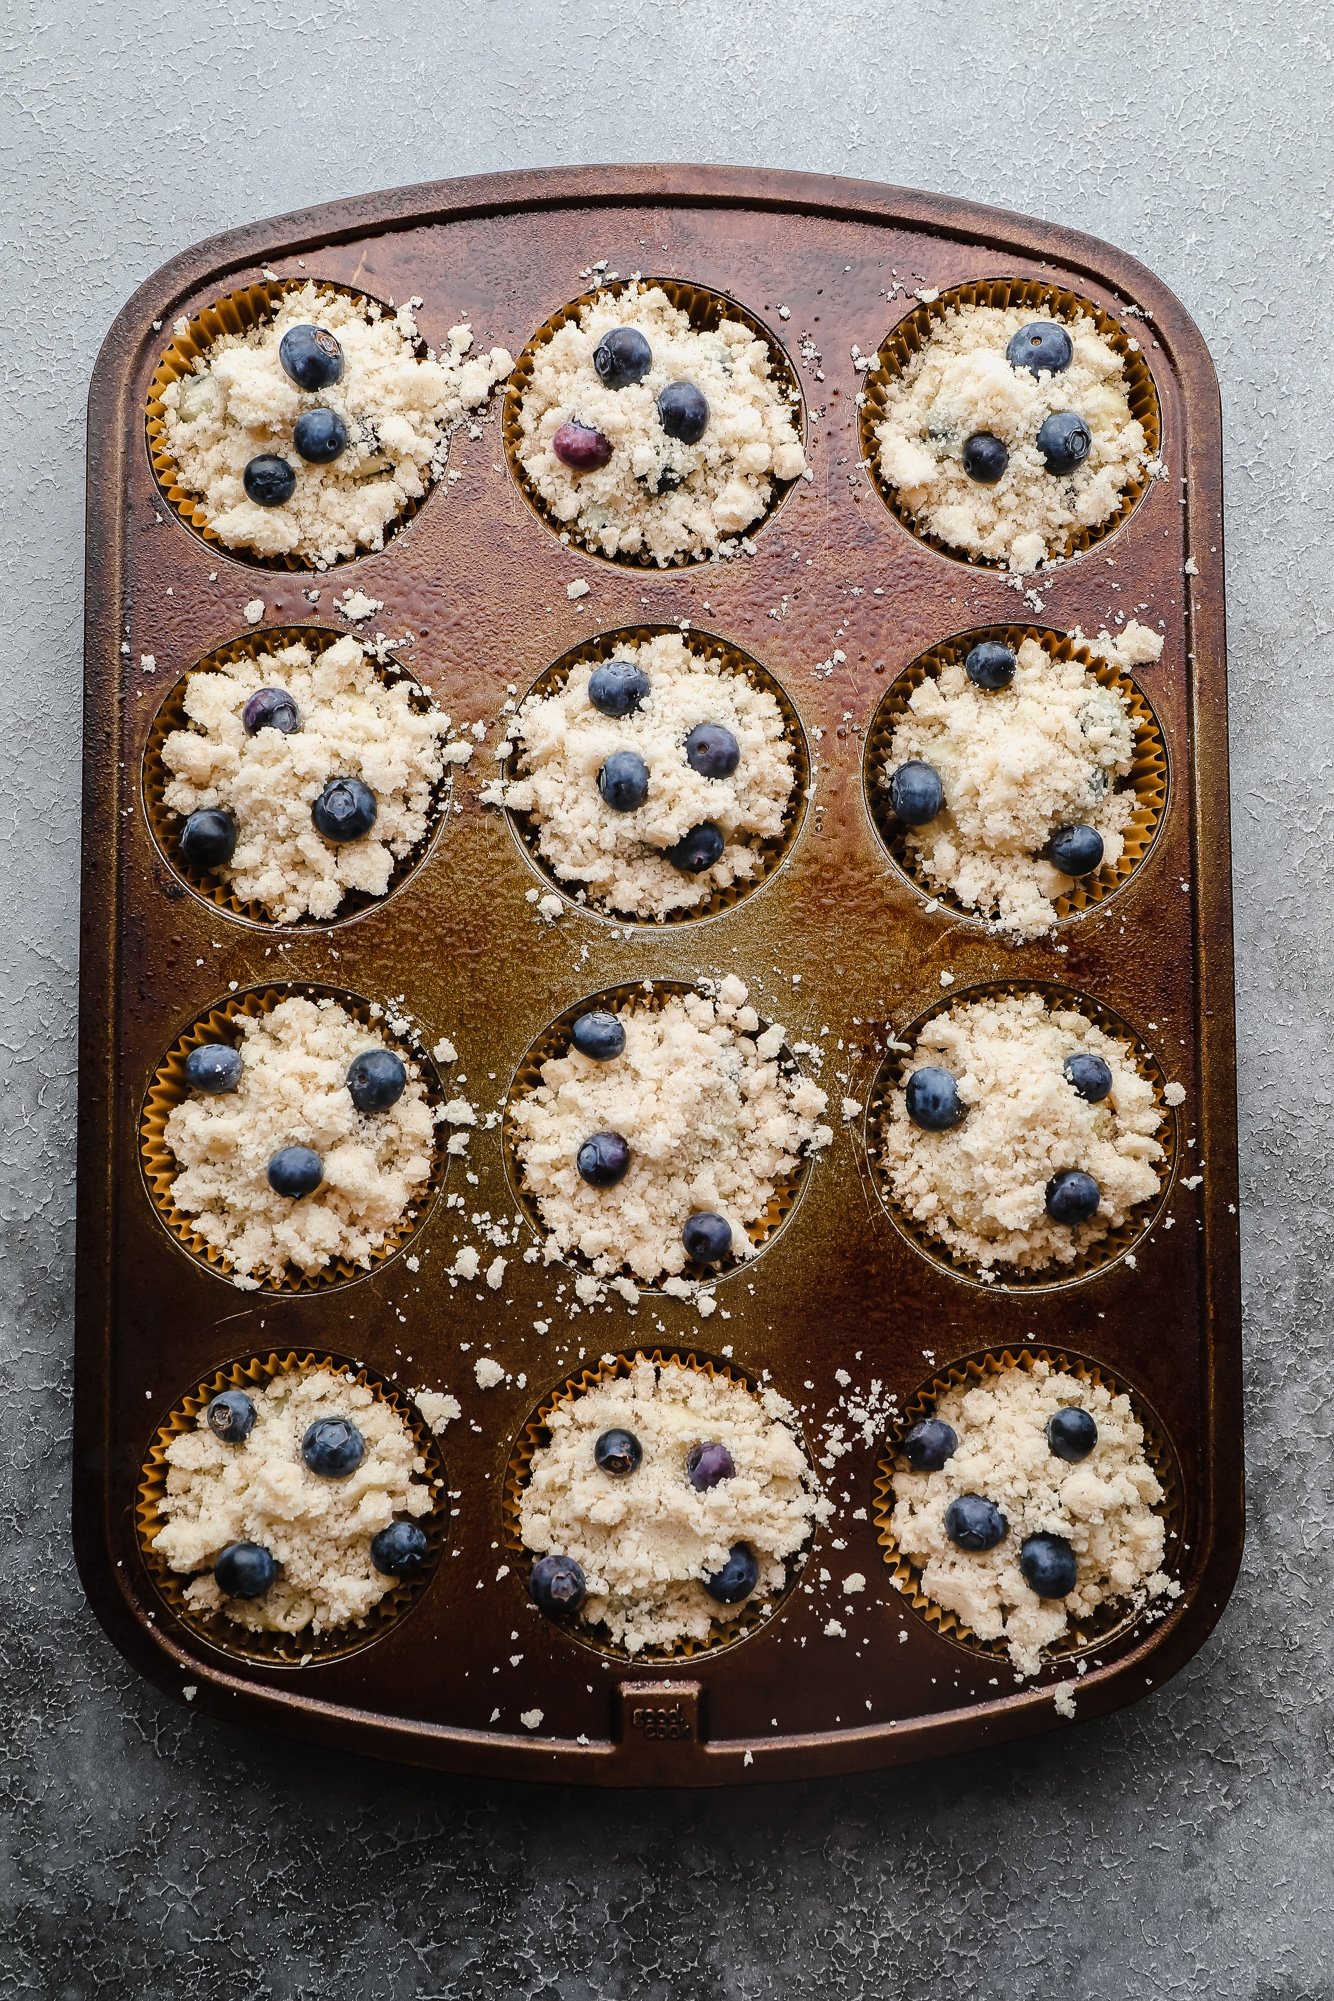 unbaked gluten free blueberry muffins in a muffin pan.